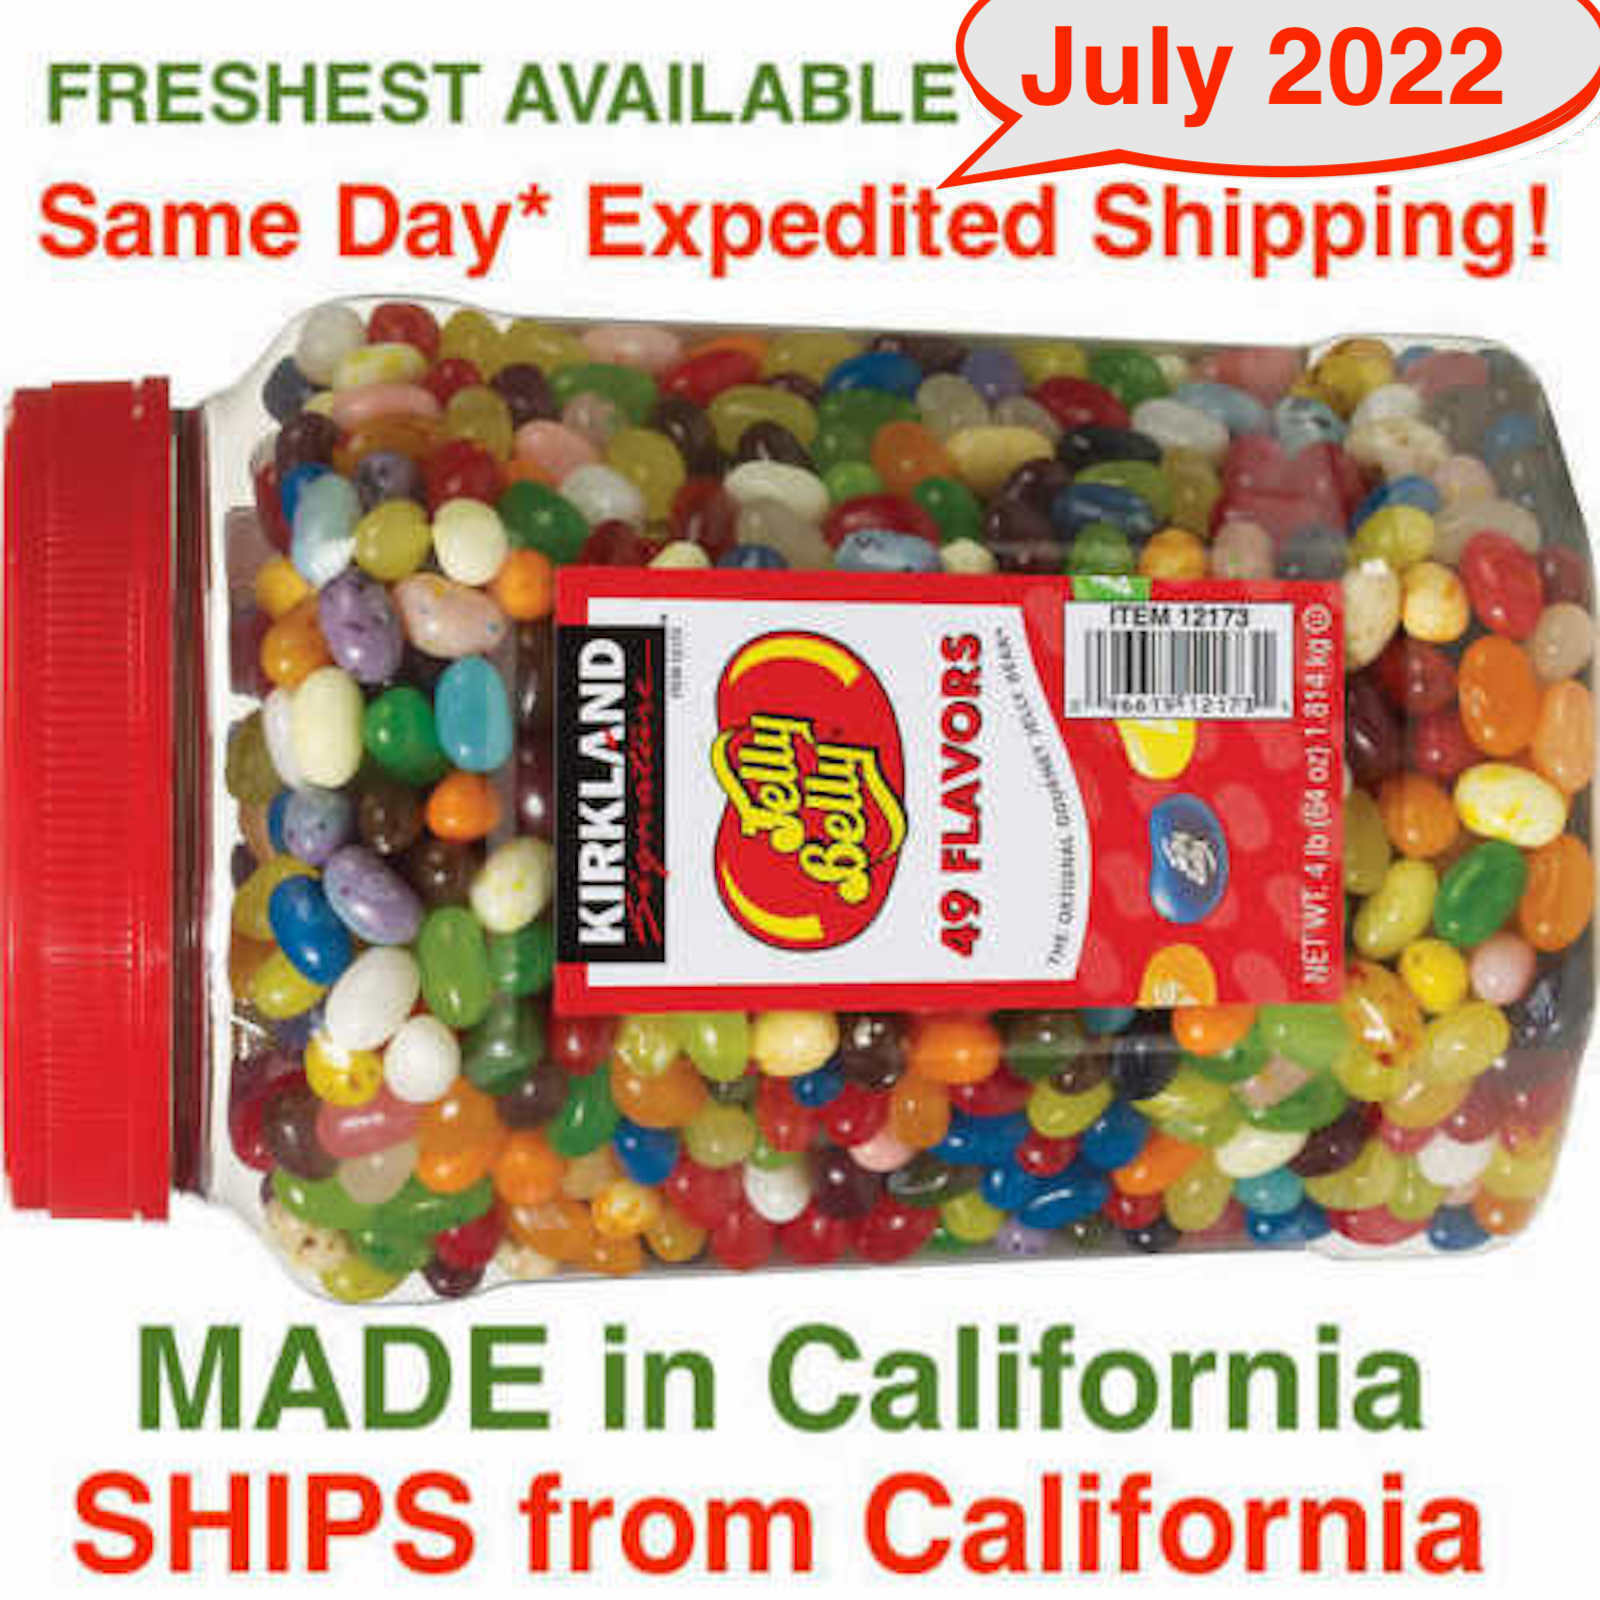 Kirkland Signature Jelly Belly Jelly Beans 49 Gourmet Flavors 4 Pounds ( 64 Oz)